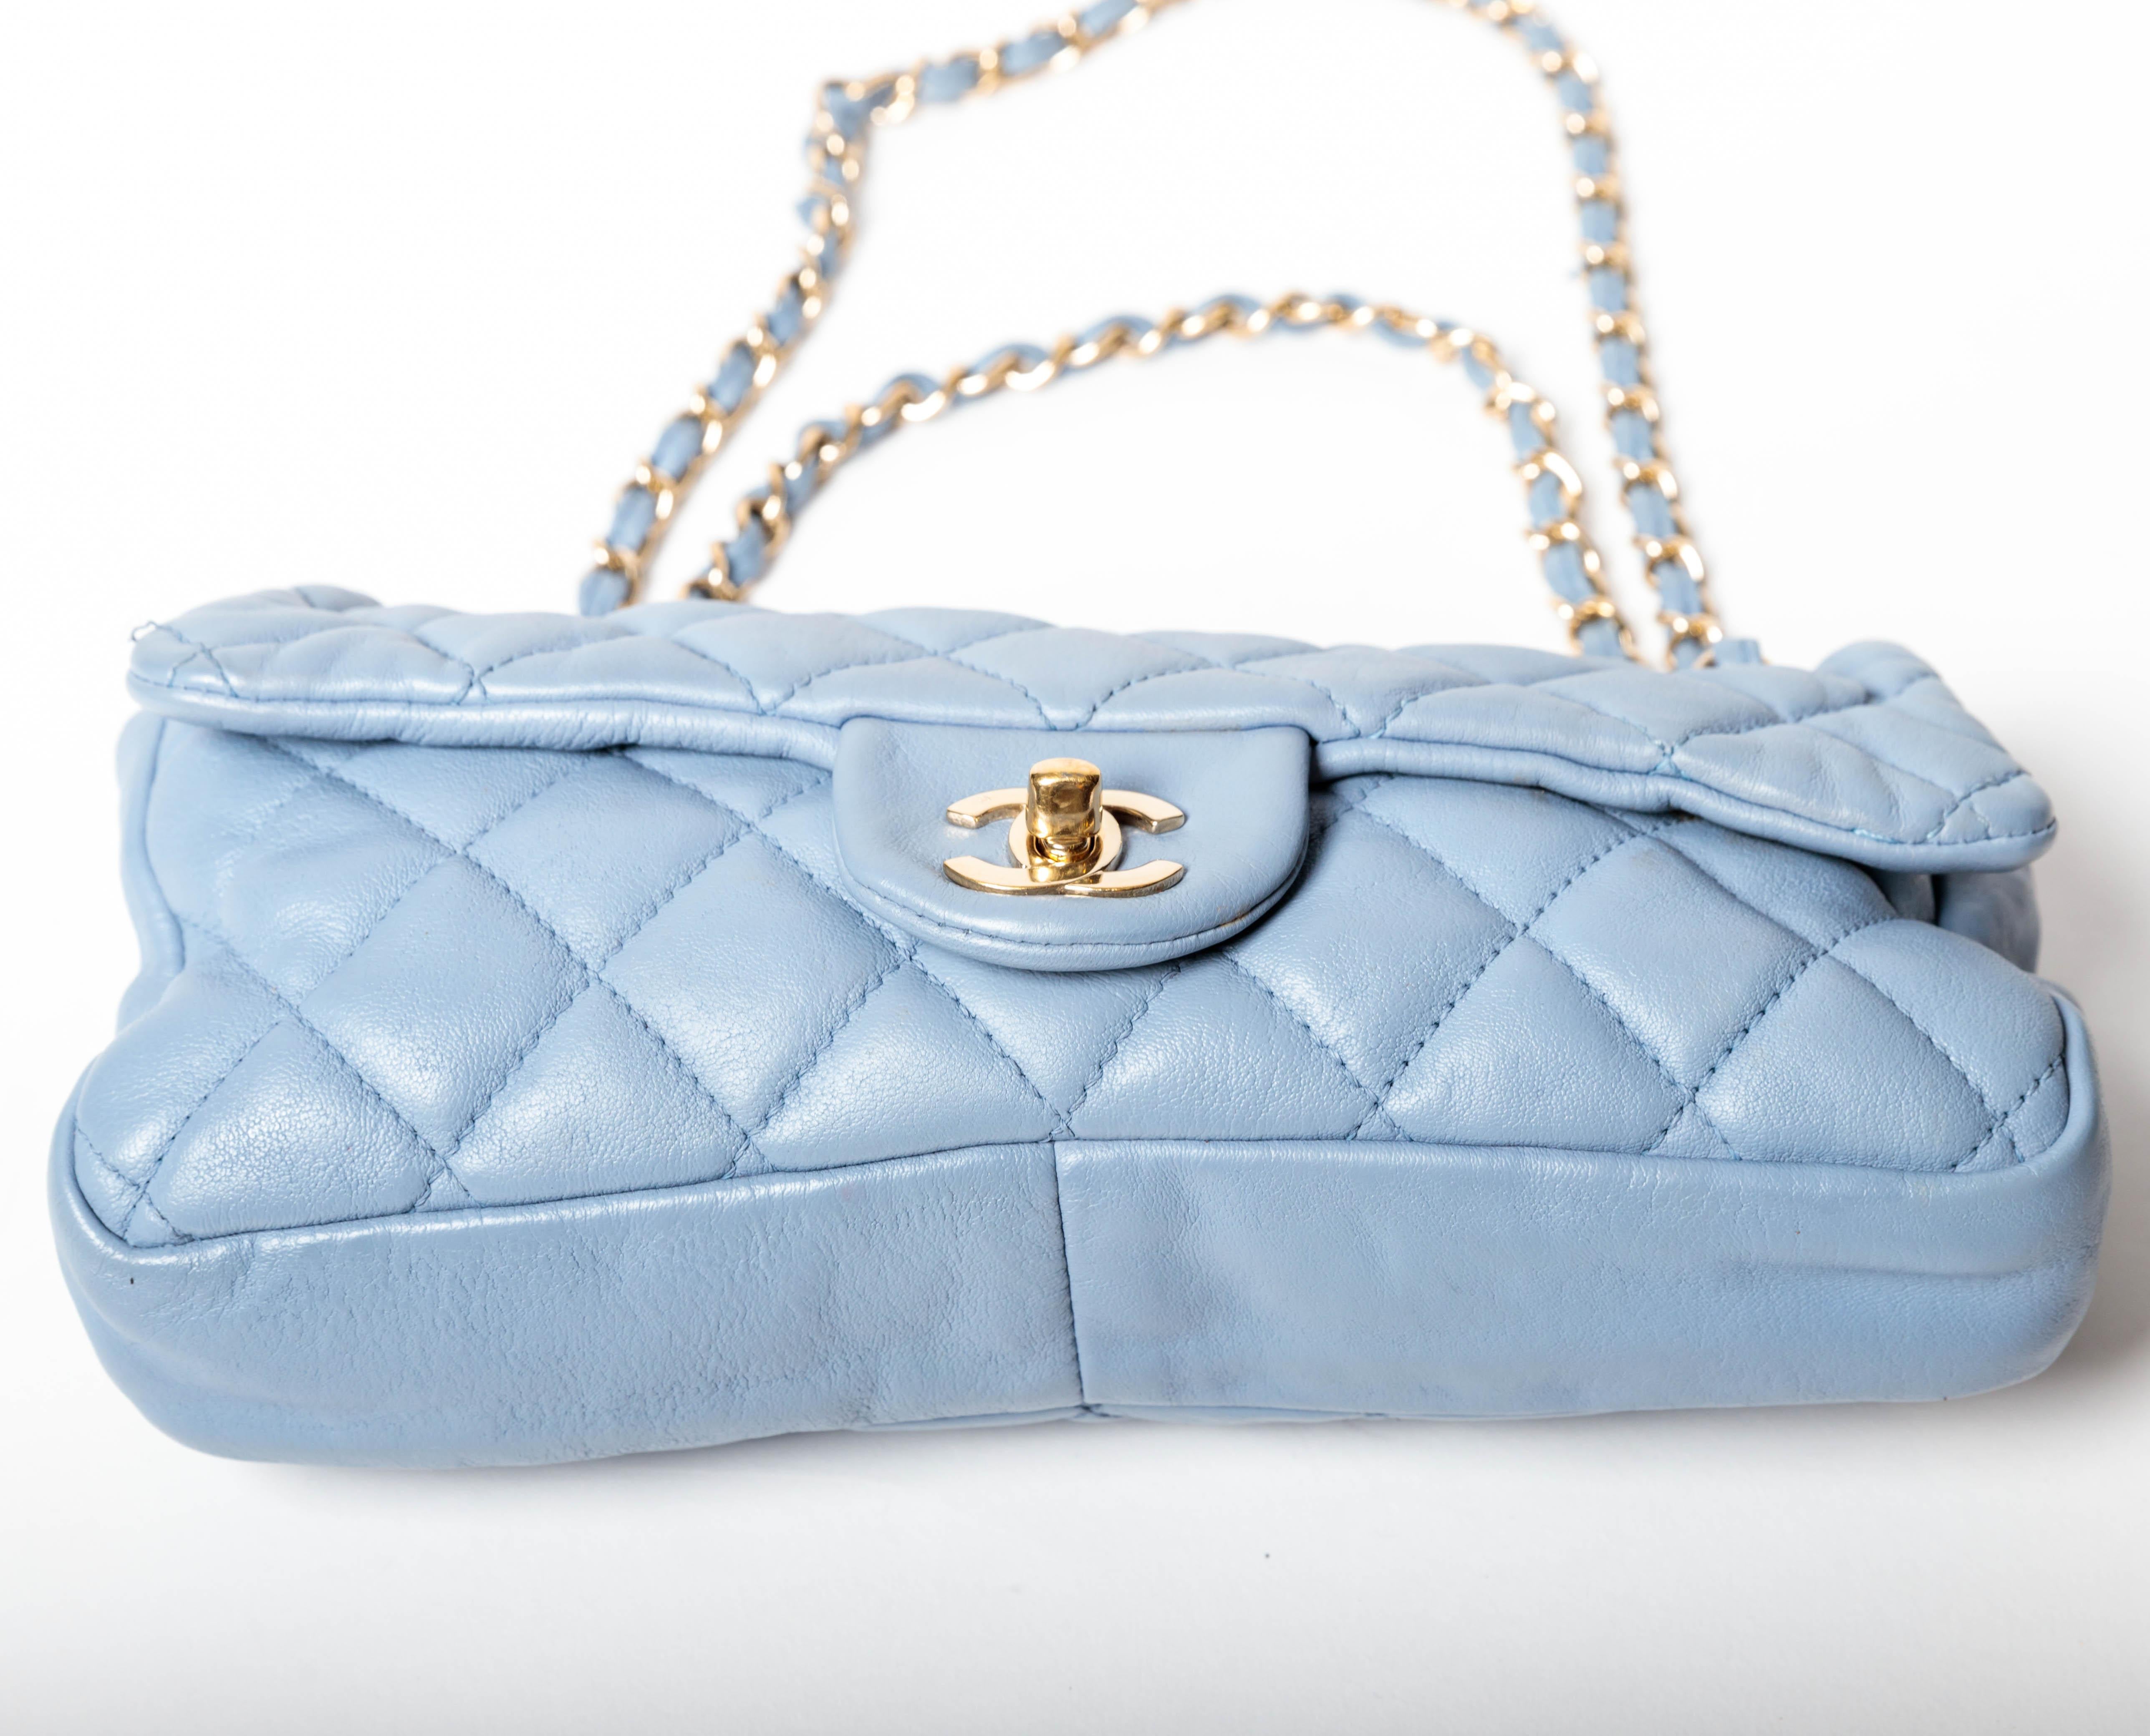 Chanel Powder Blue Single Flap with Gold Hardware - 2005 - 2006 Collection For Sale 2